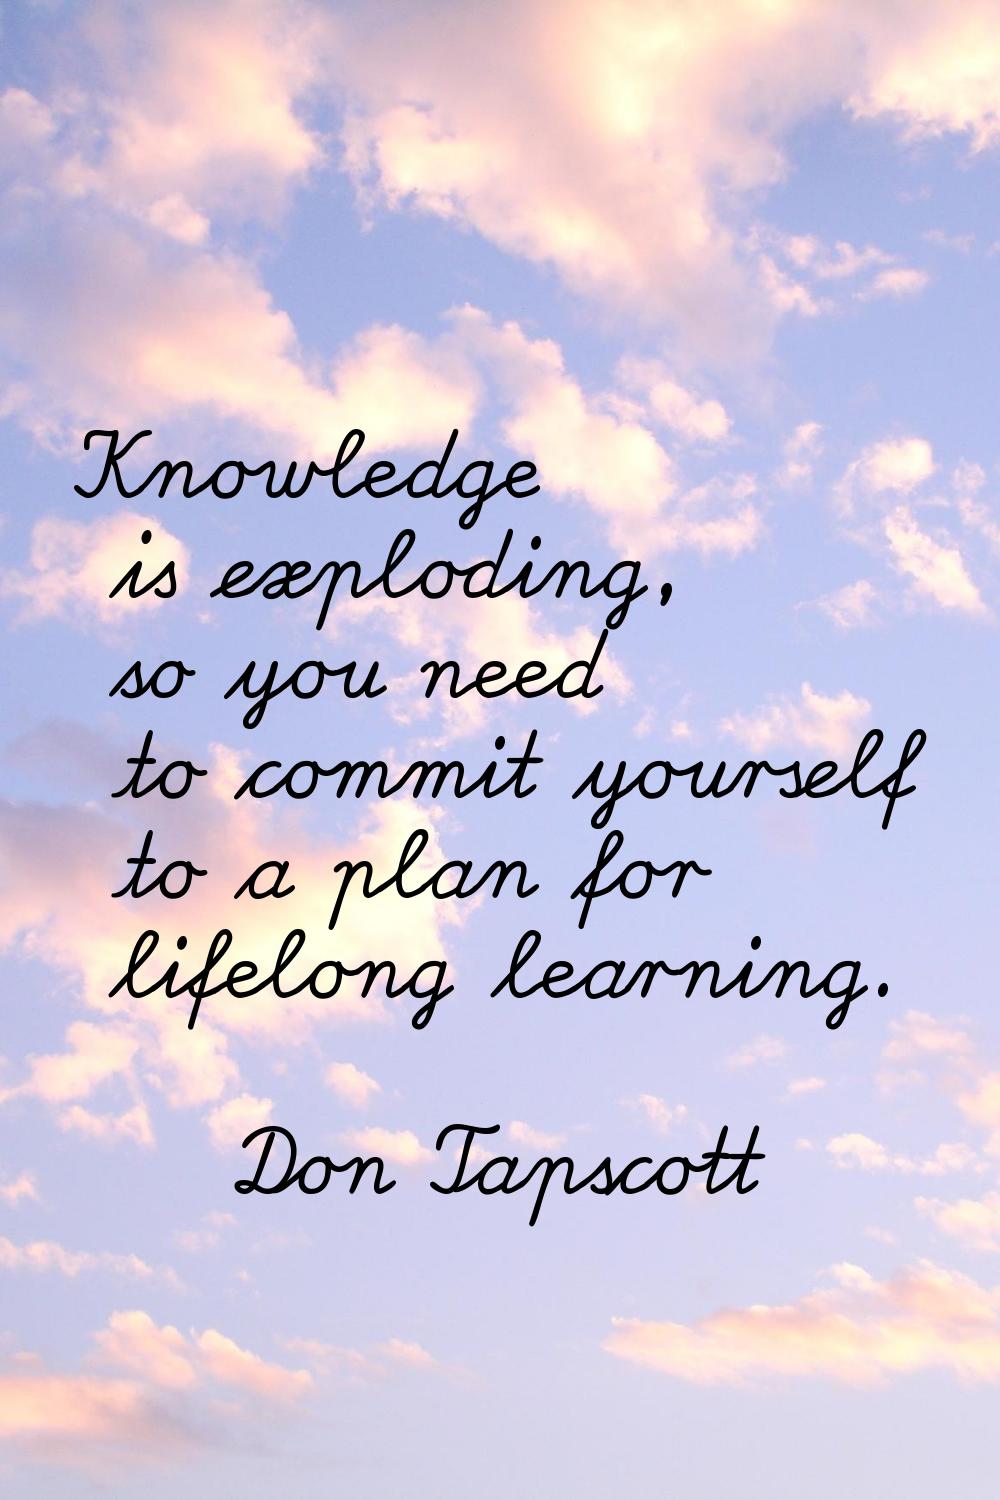 Knowledge is exploding, so you need to commit yourself to a plan for lifelong learning.